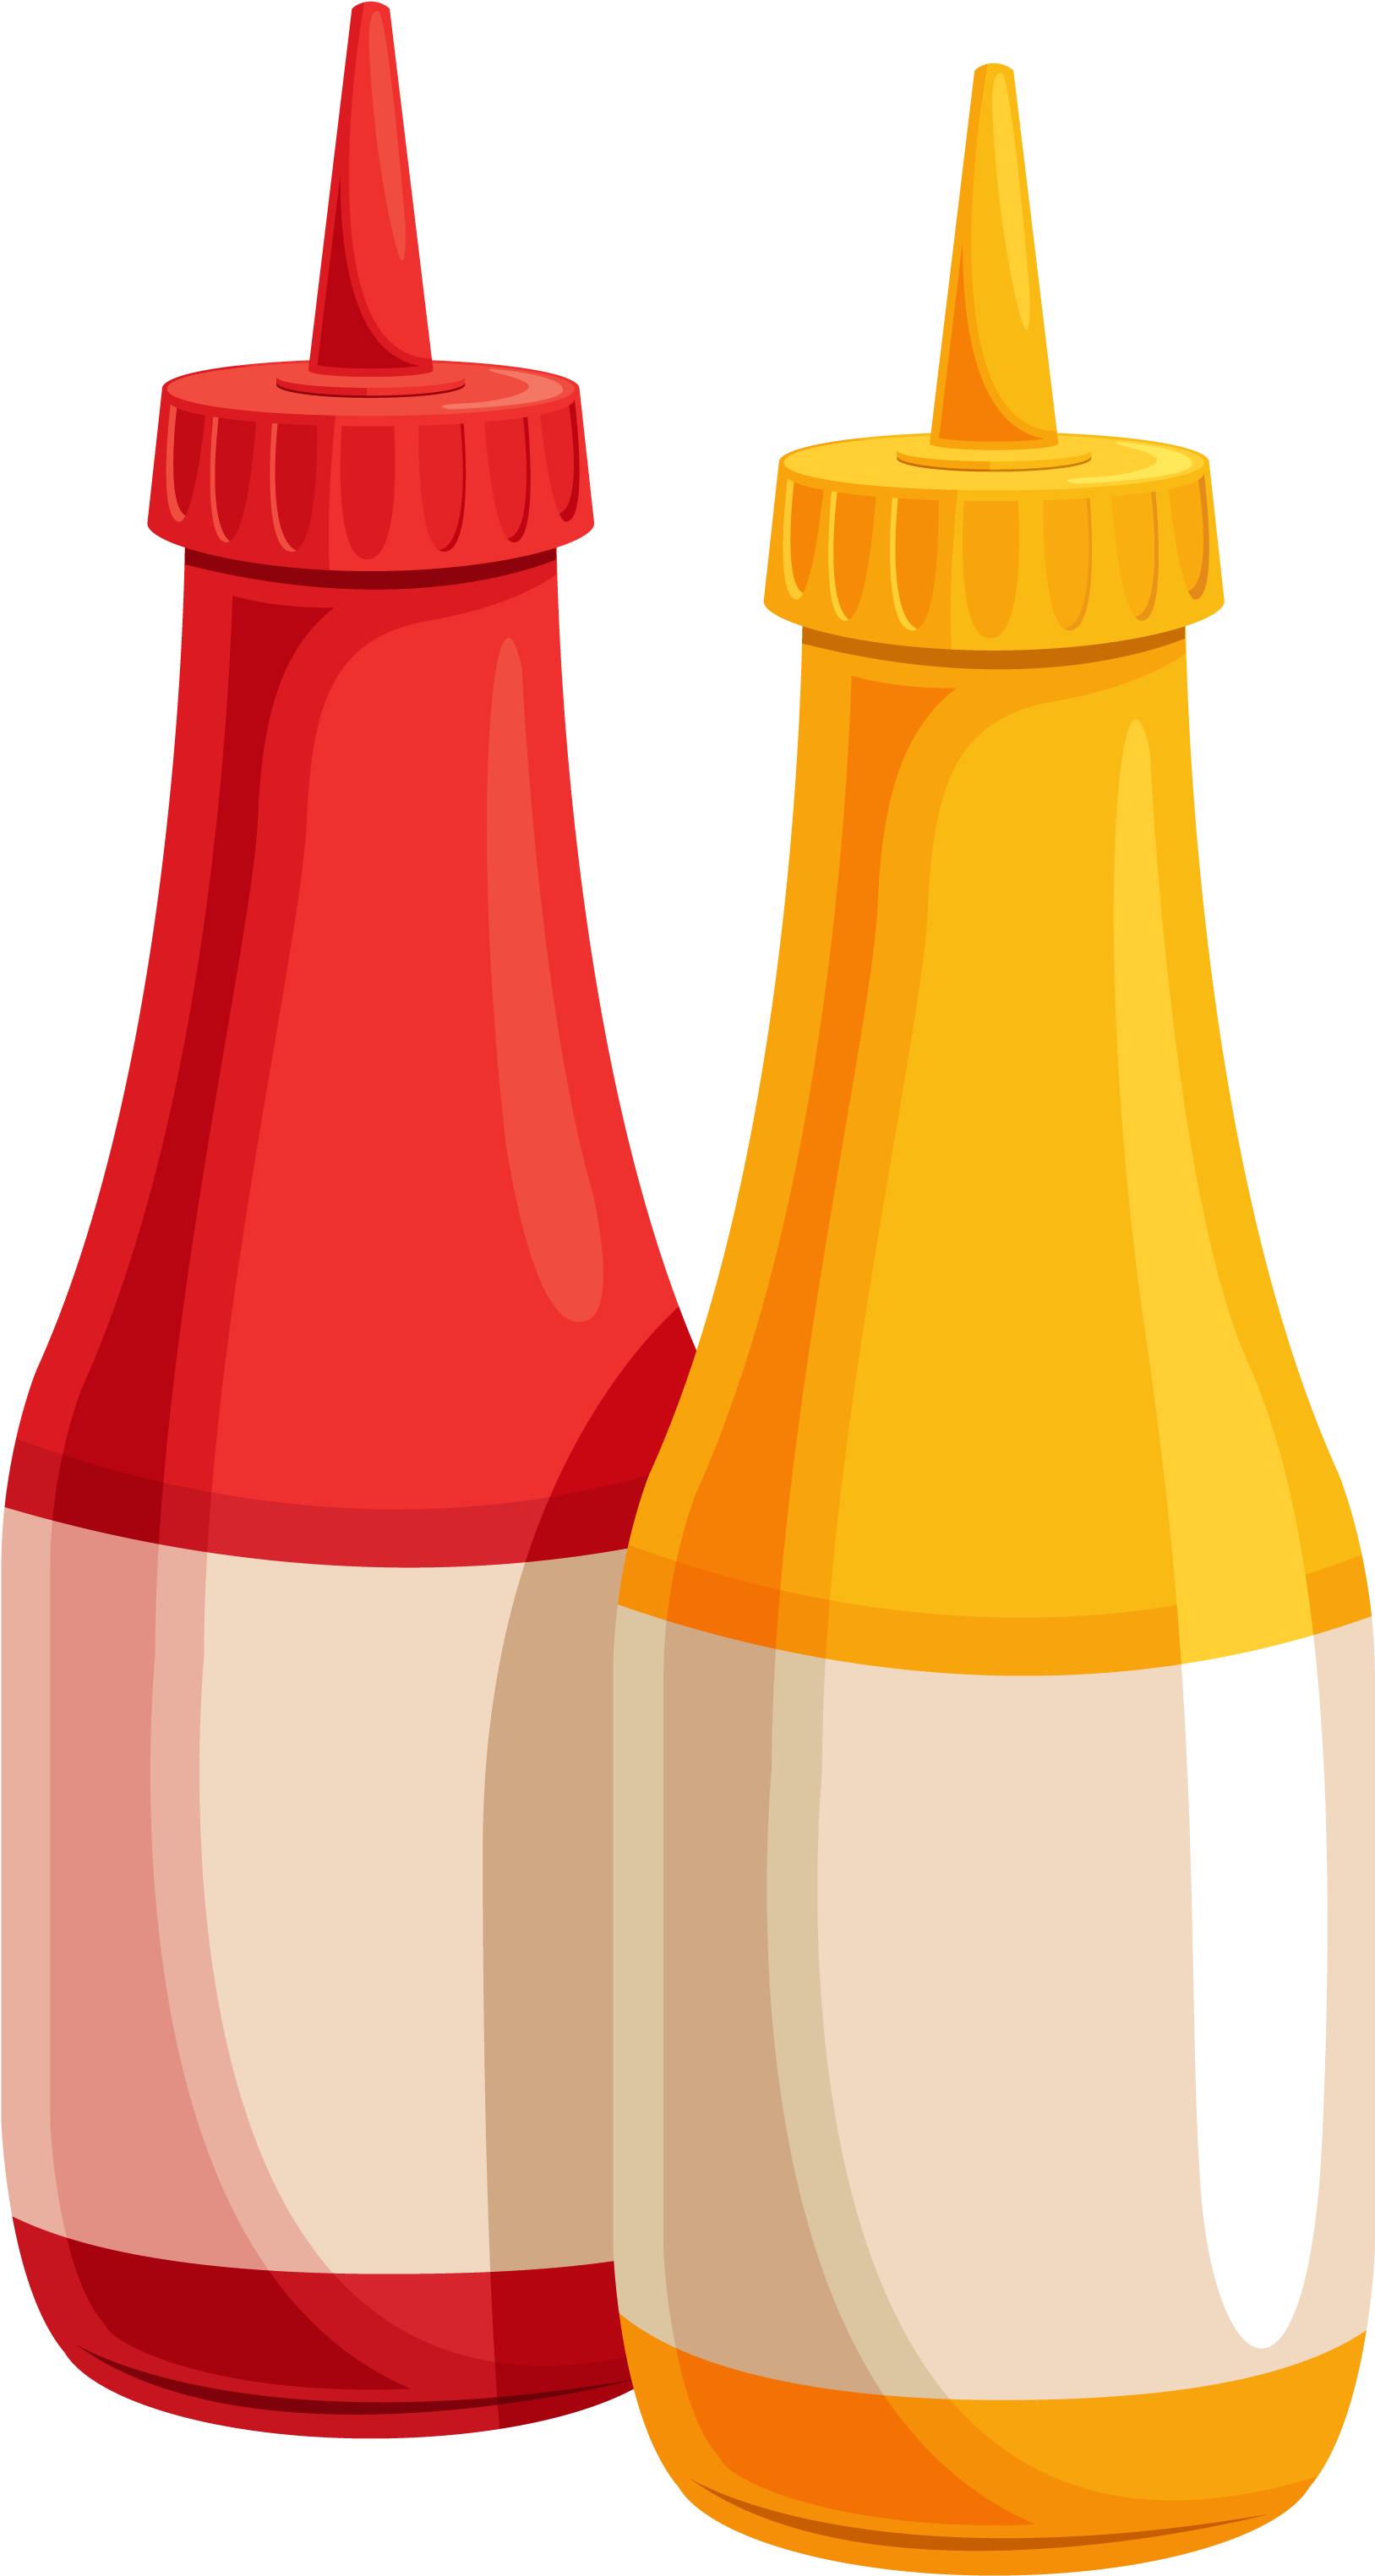 Ketchup And Mustard Bottles Png Clipart Image - Ketchup And Mustard Bottles Png Clipart Image (1842x3128)